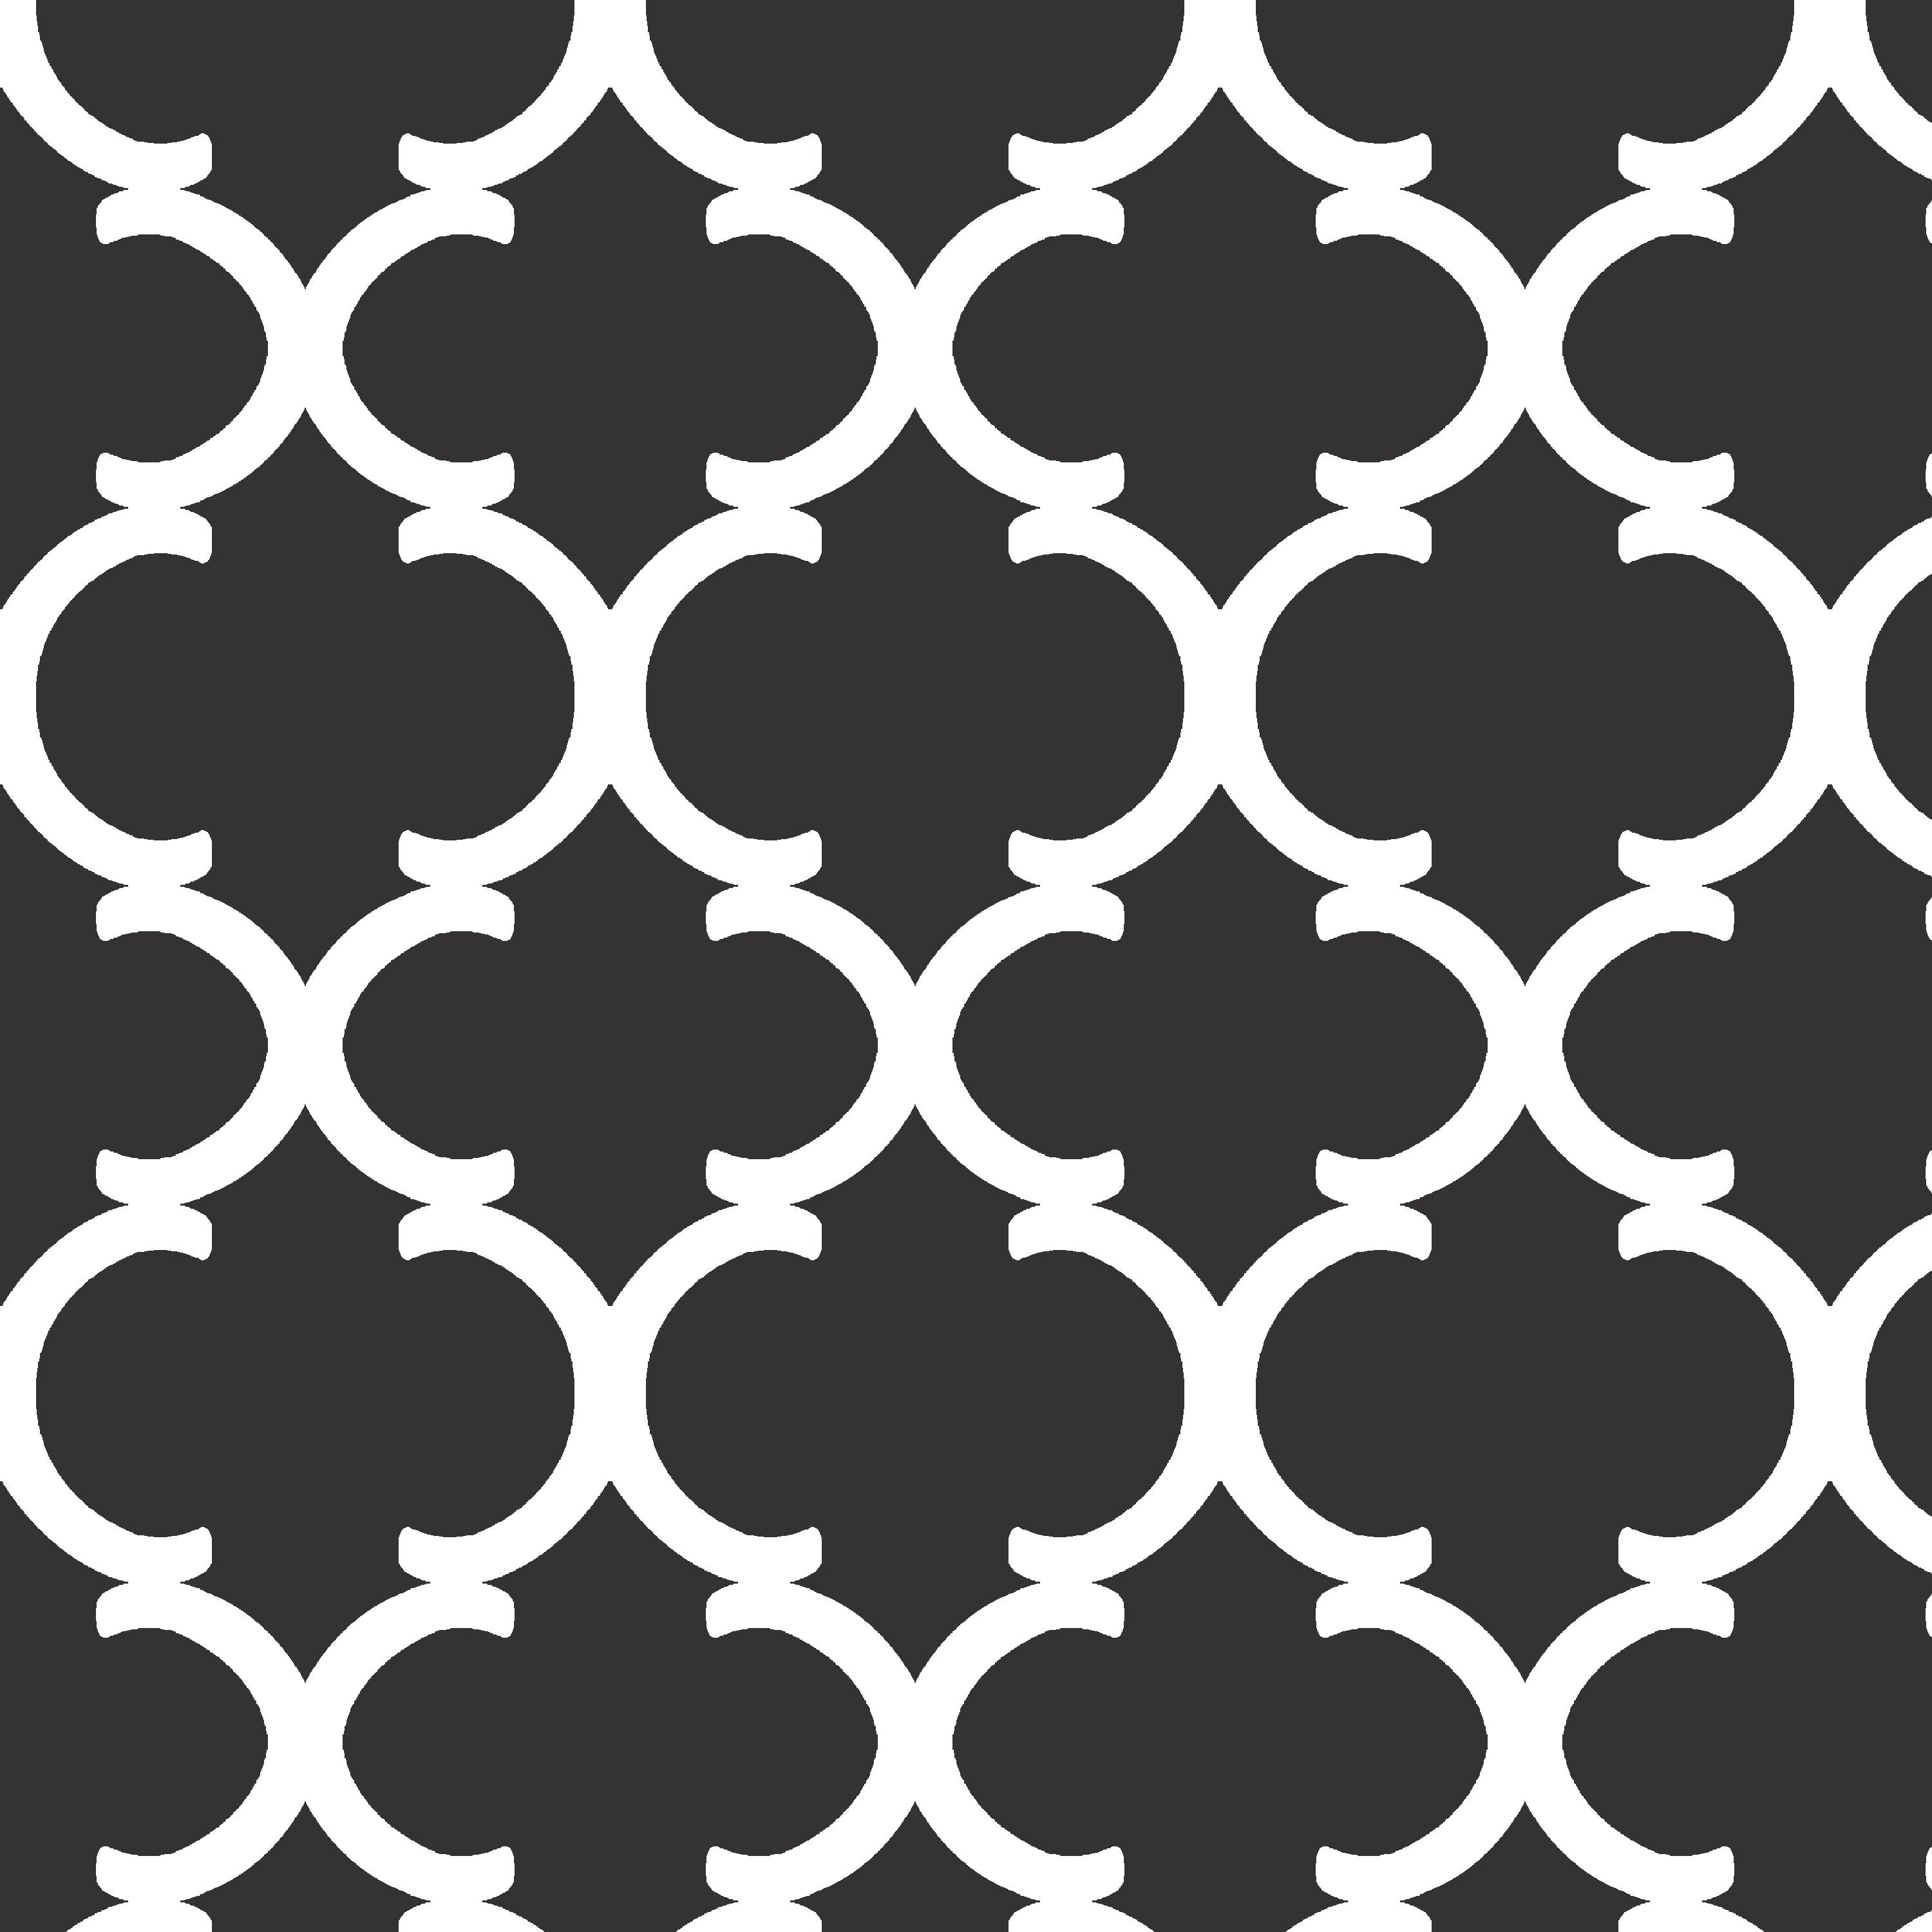 Waverly Inspirations 54" 100% Cotton & Craft Sewing Fabric by the Yard, Black and White